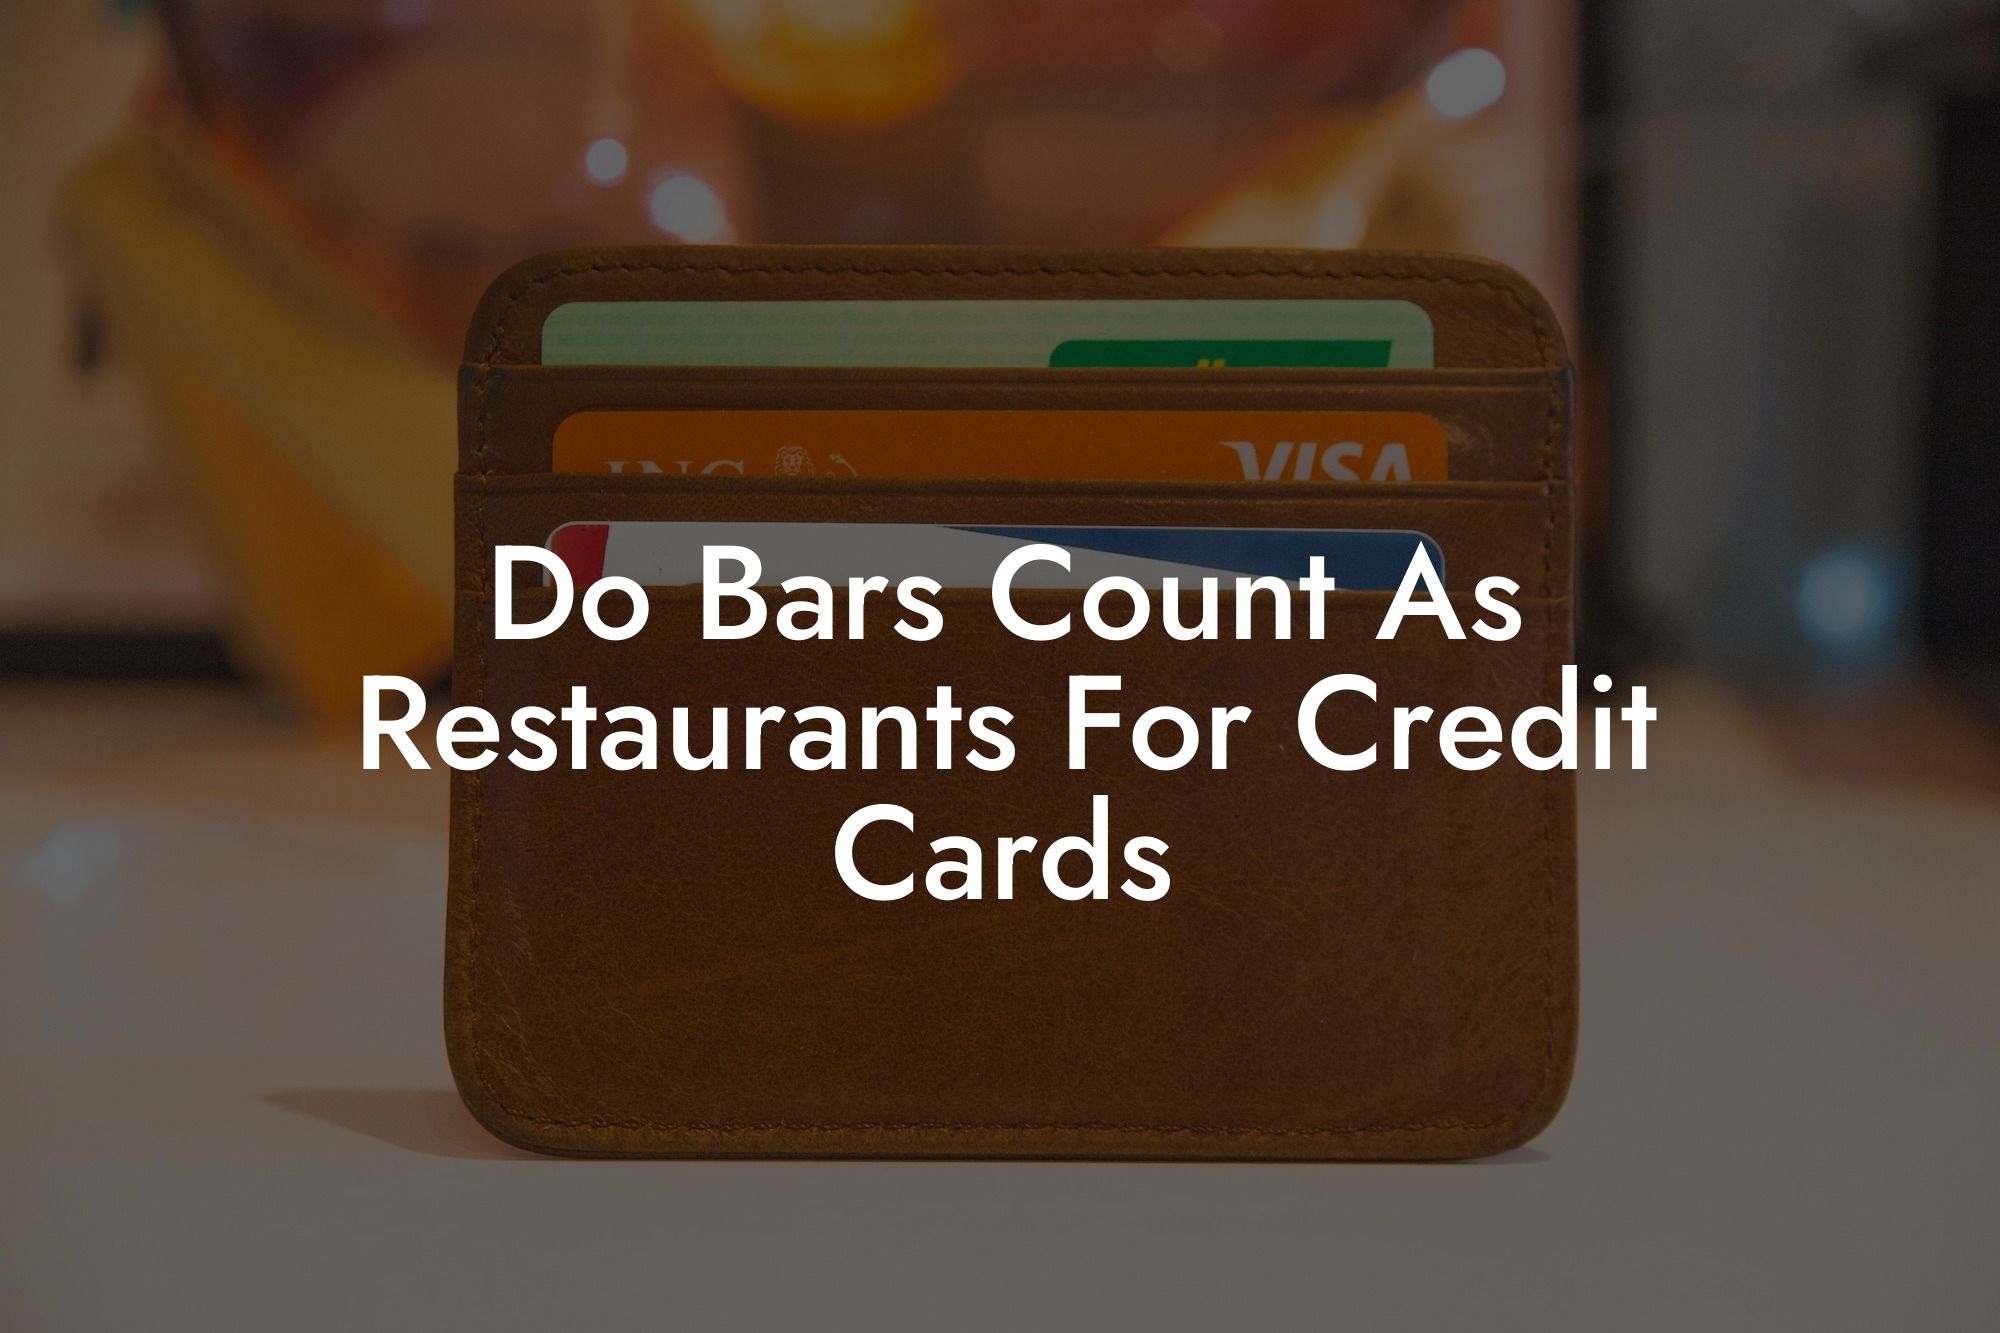 Do Bars Count As Restaurants For Credit Cards